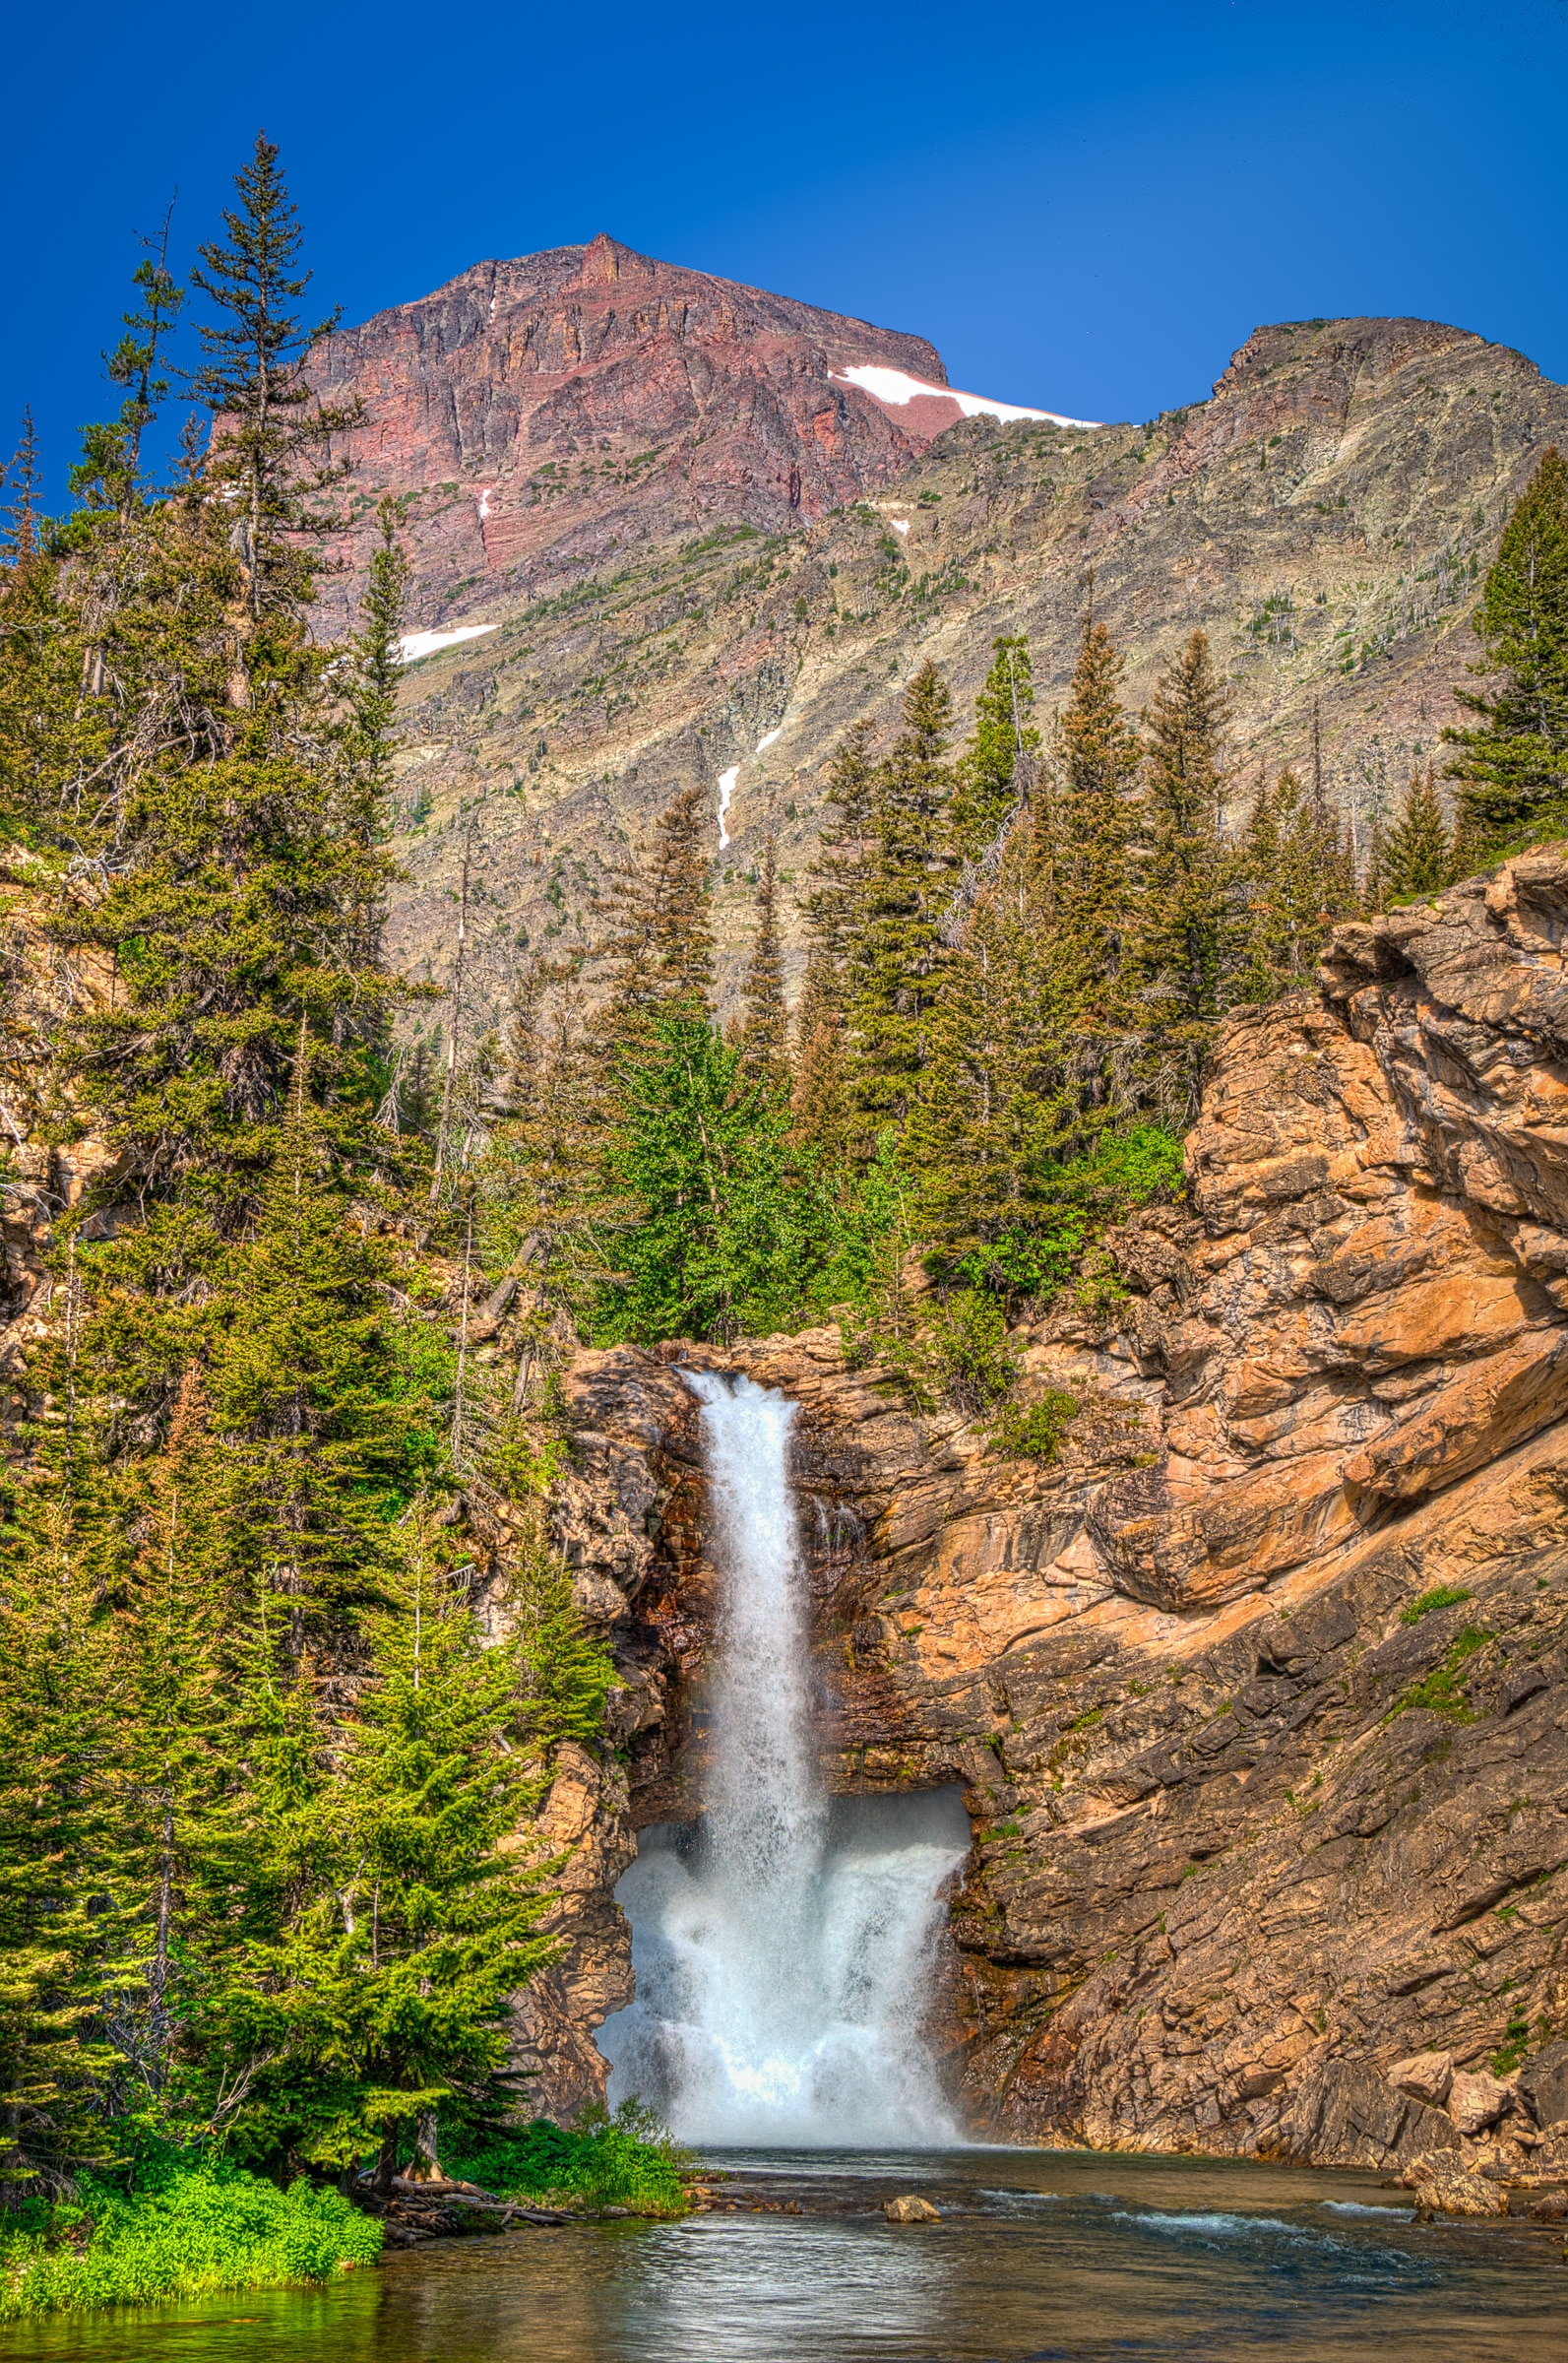 Running Eagle Falls, also known as Trick Falls, flows off the outlet stream between Two Medicine Lake and Lower Two Medicine Lake.